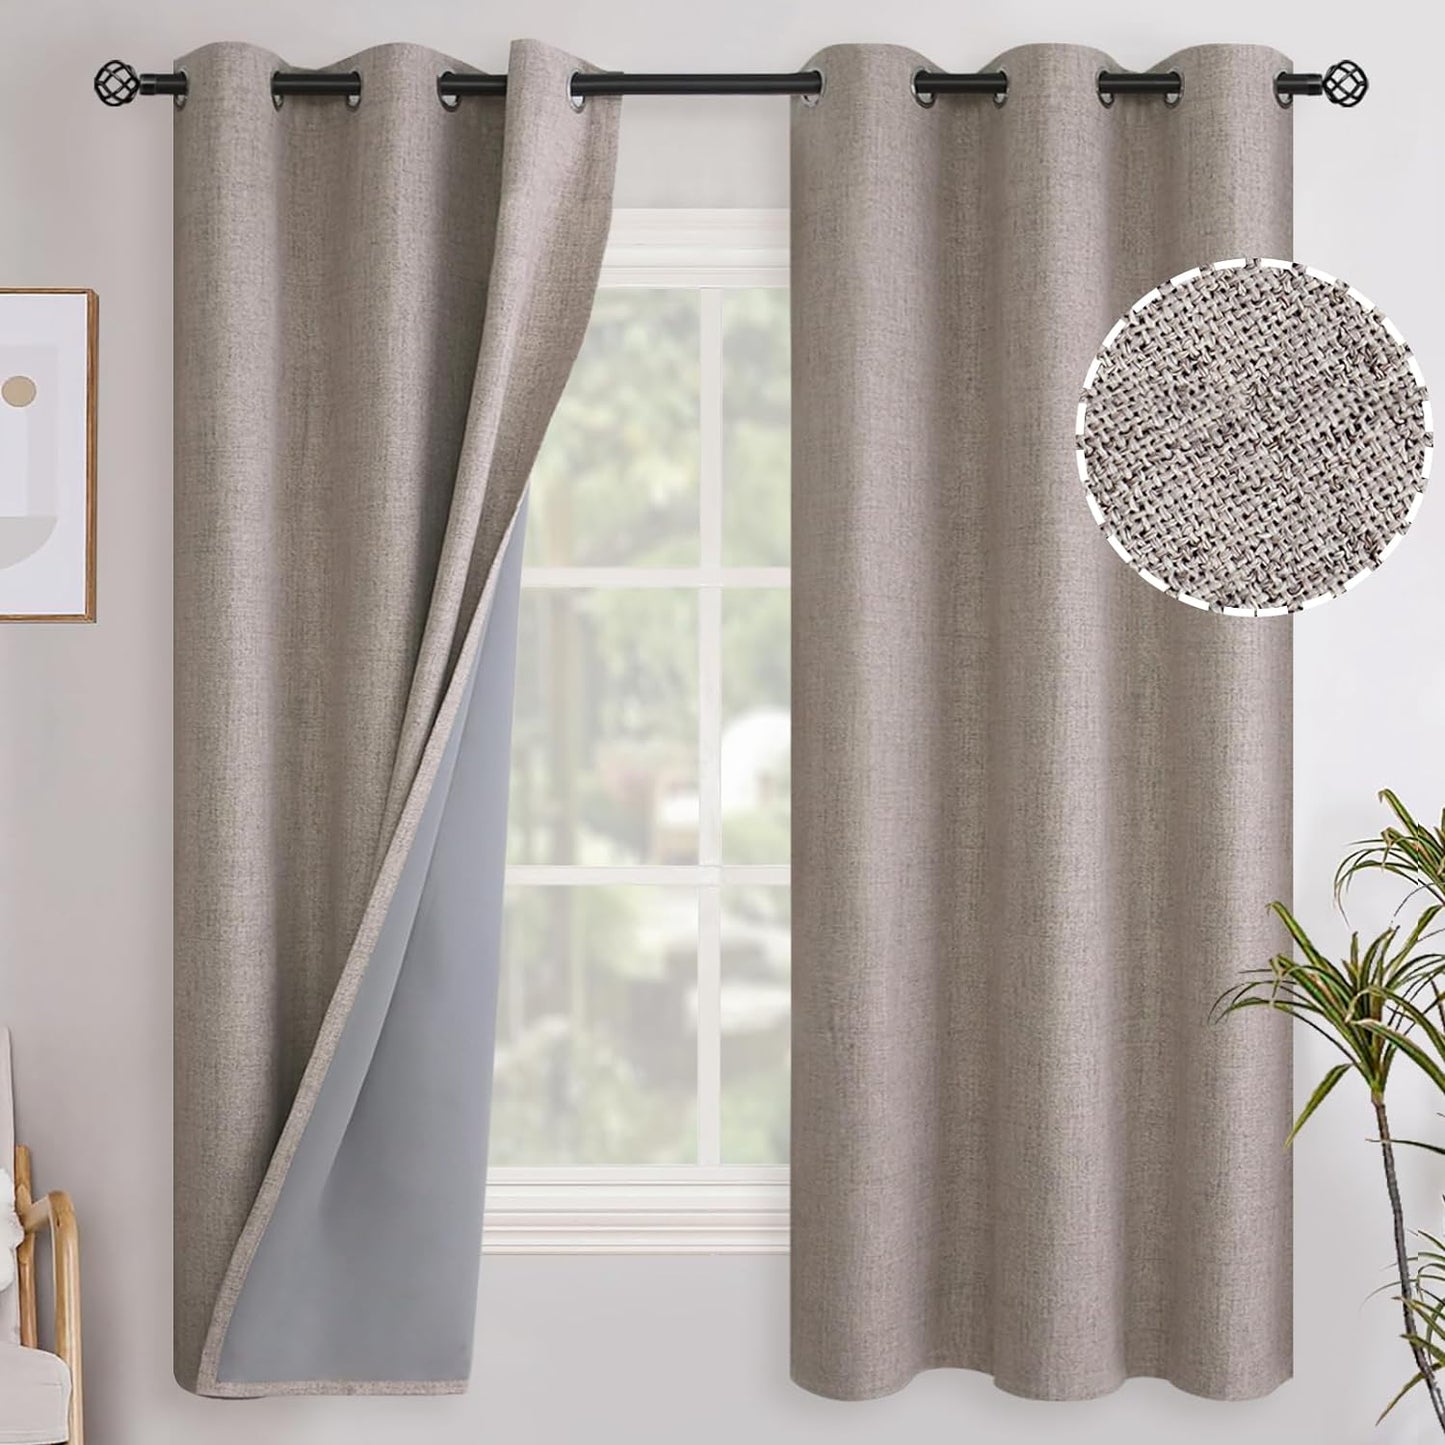 Youngstex Linen Blackout Curtains 63 Inch Length, Grommet Darkening Bedroom Curtains Burlap Linen Window Drapes Thermal Insulated for Basement Summer Heat, 2 Panels, 52 X 63 Inch, Beige  YoungsTex Burlap 42W X 63L 